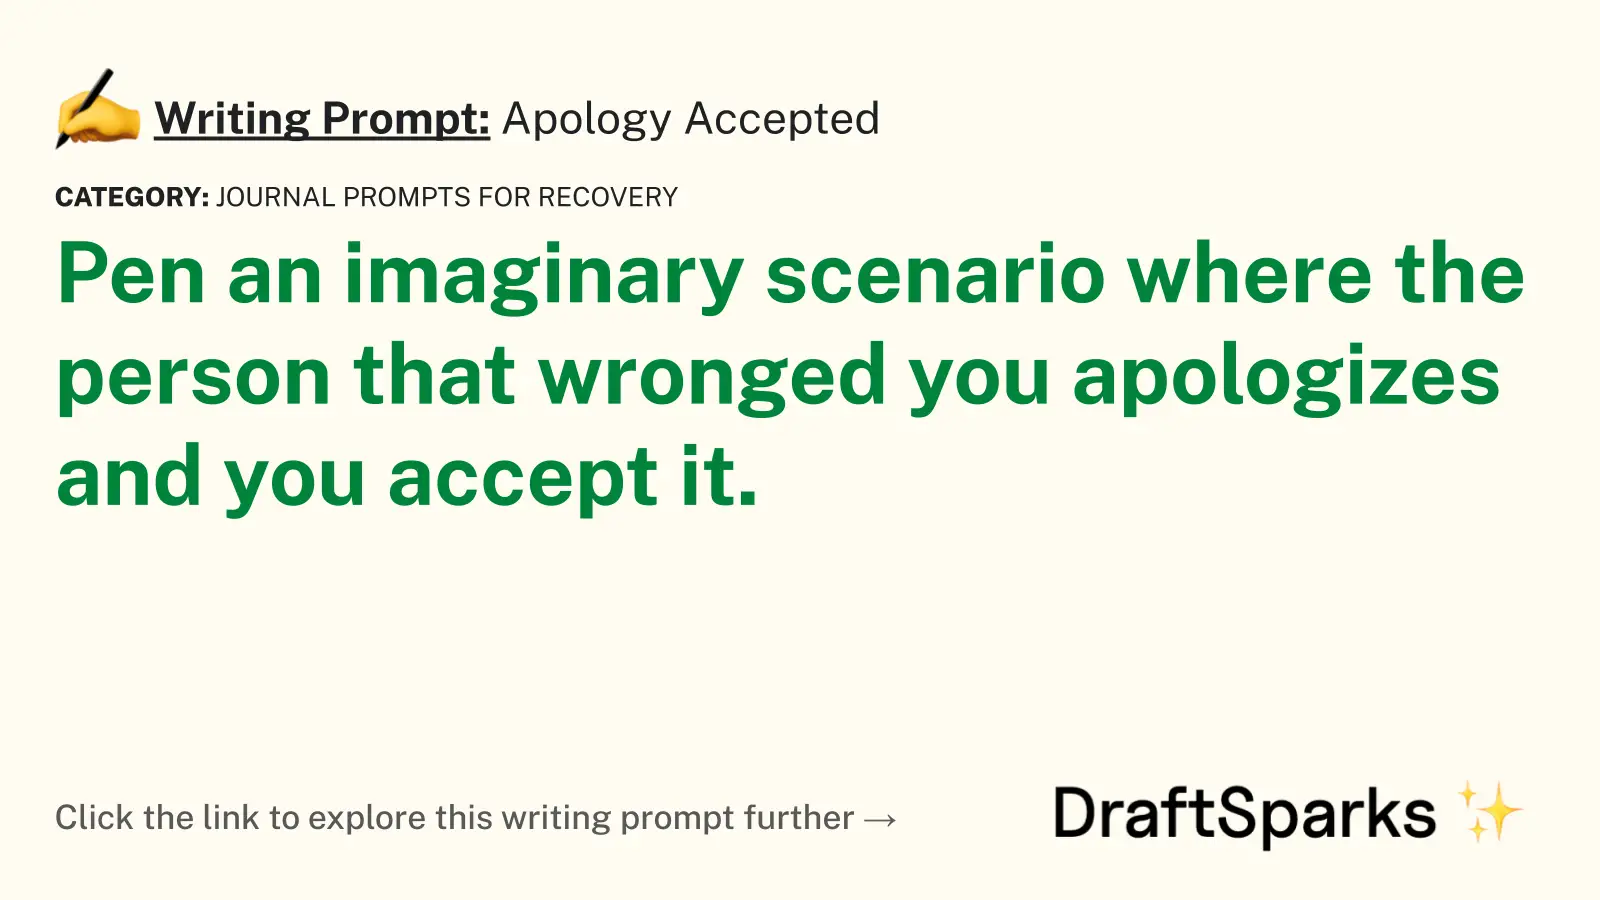 Apology Accepted